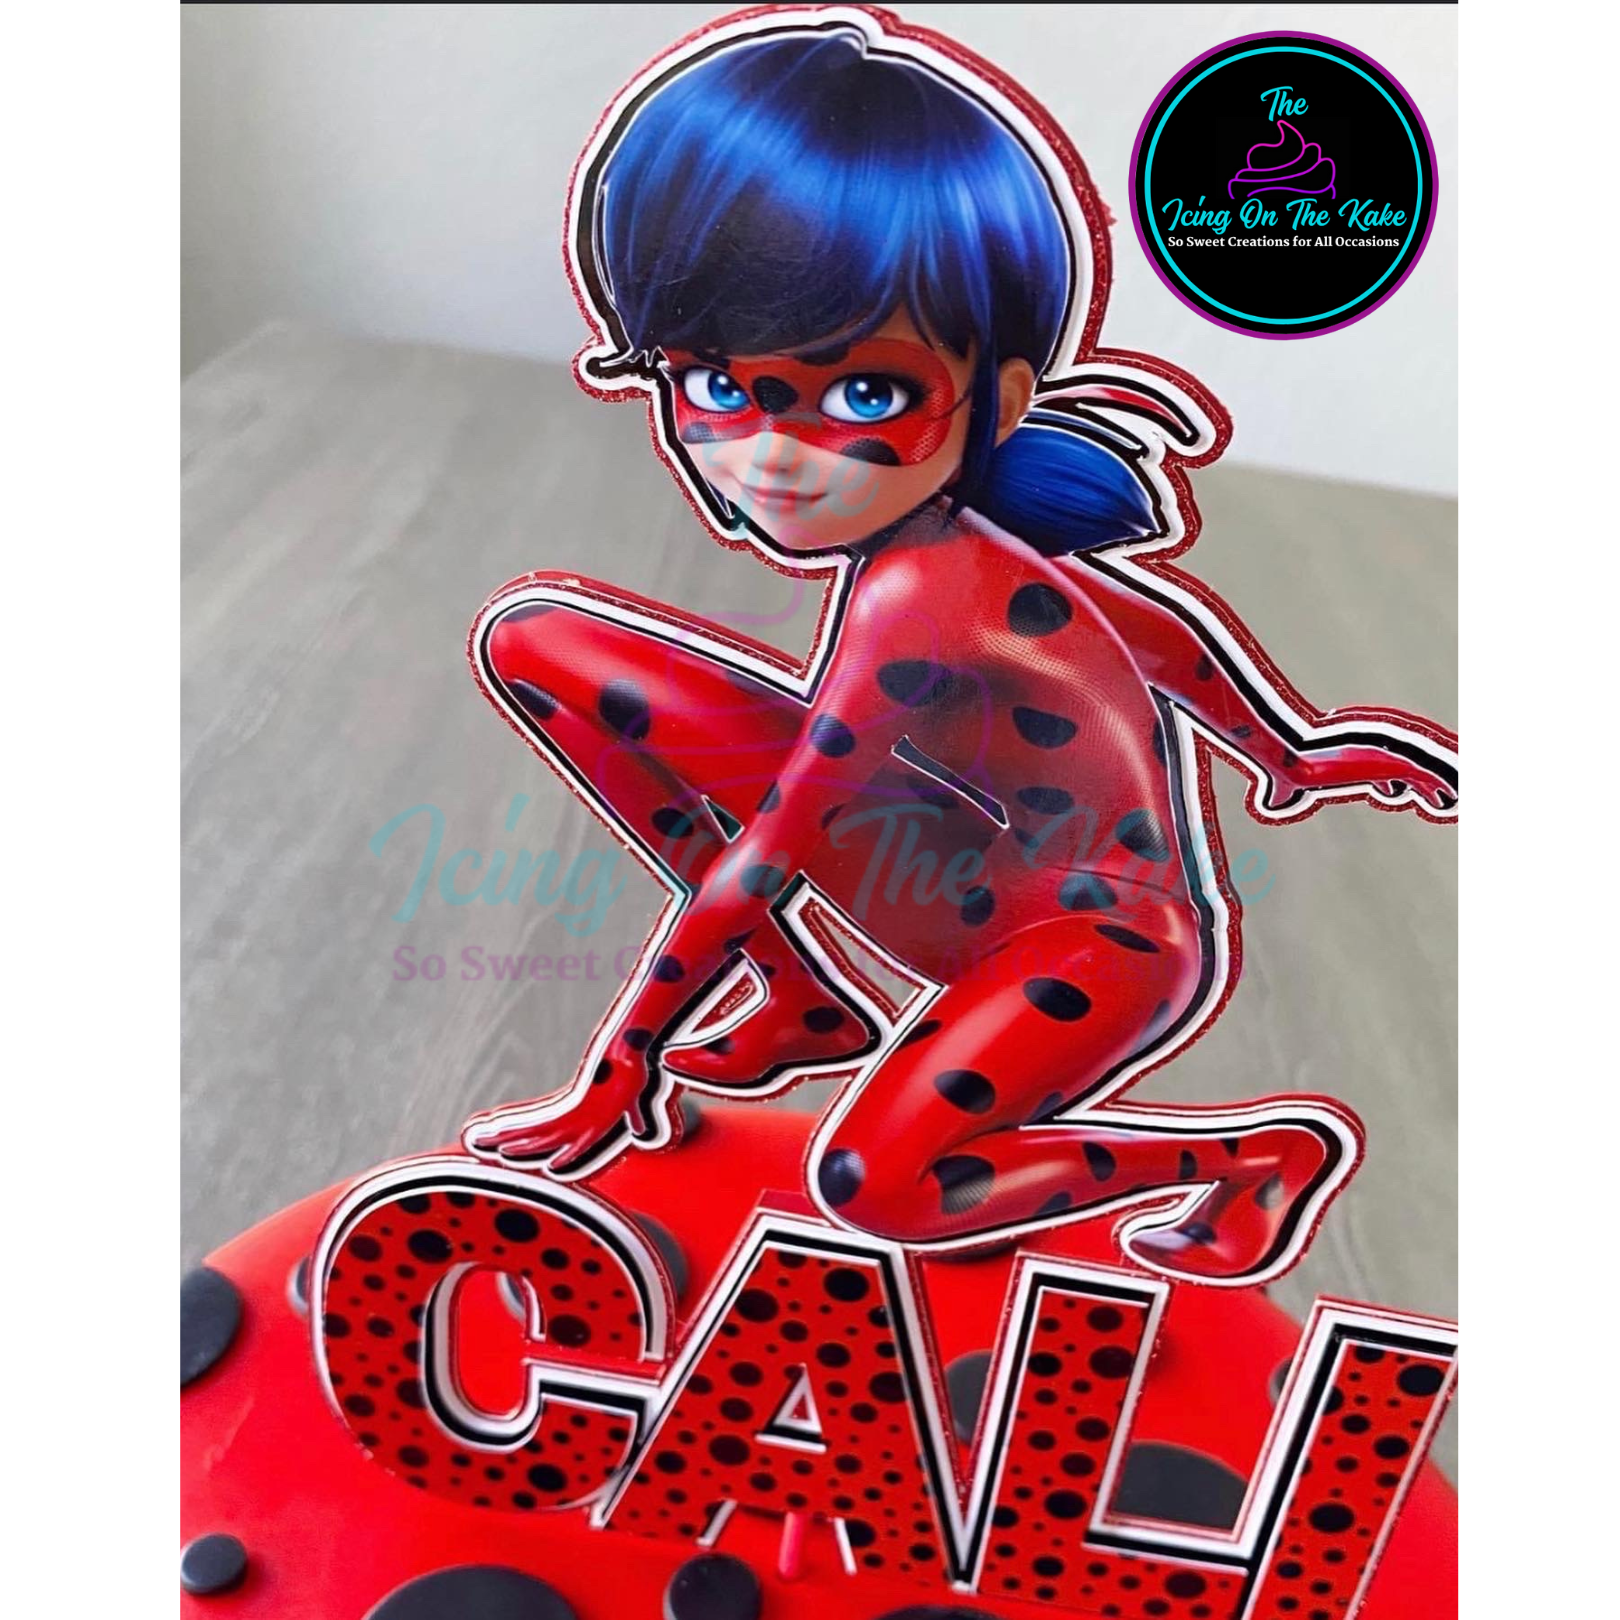 Miraculous Ladybug Inspired Cake Topper/Centerpiece – The Icing On The Kake